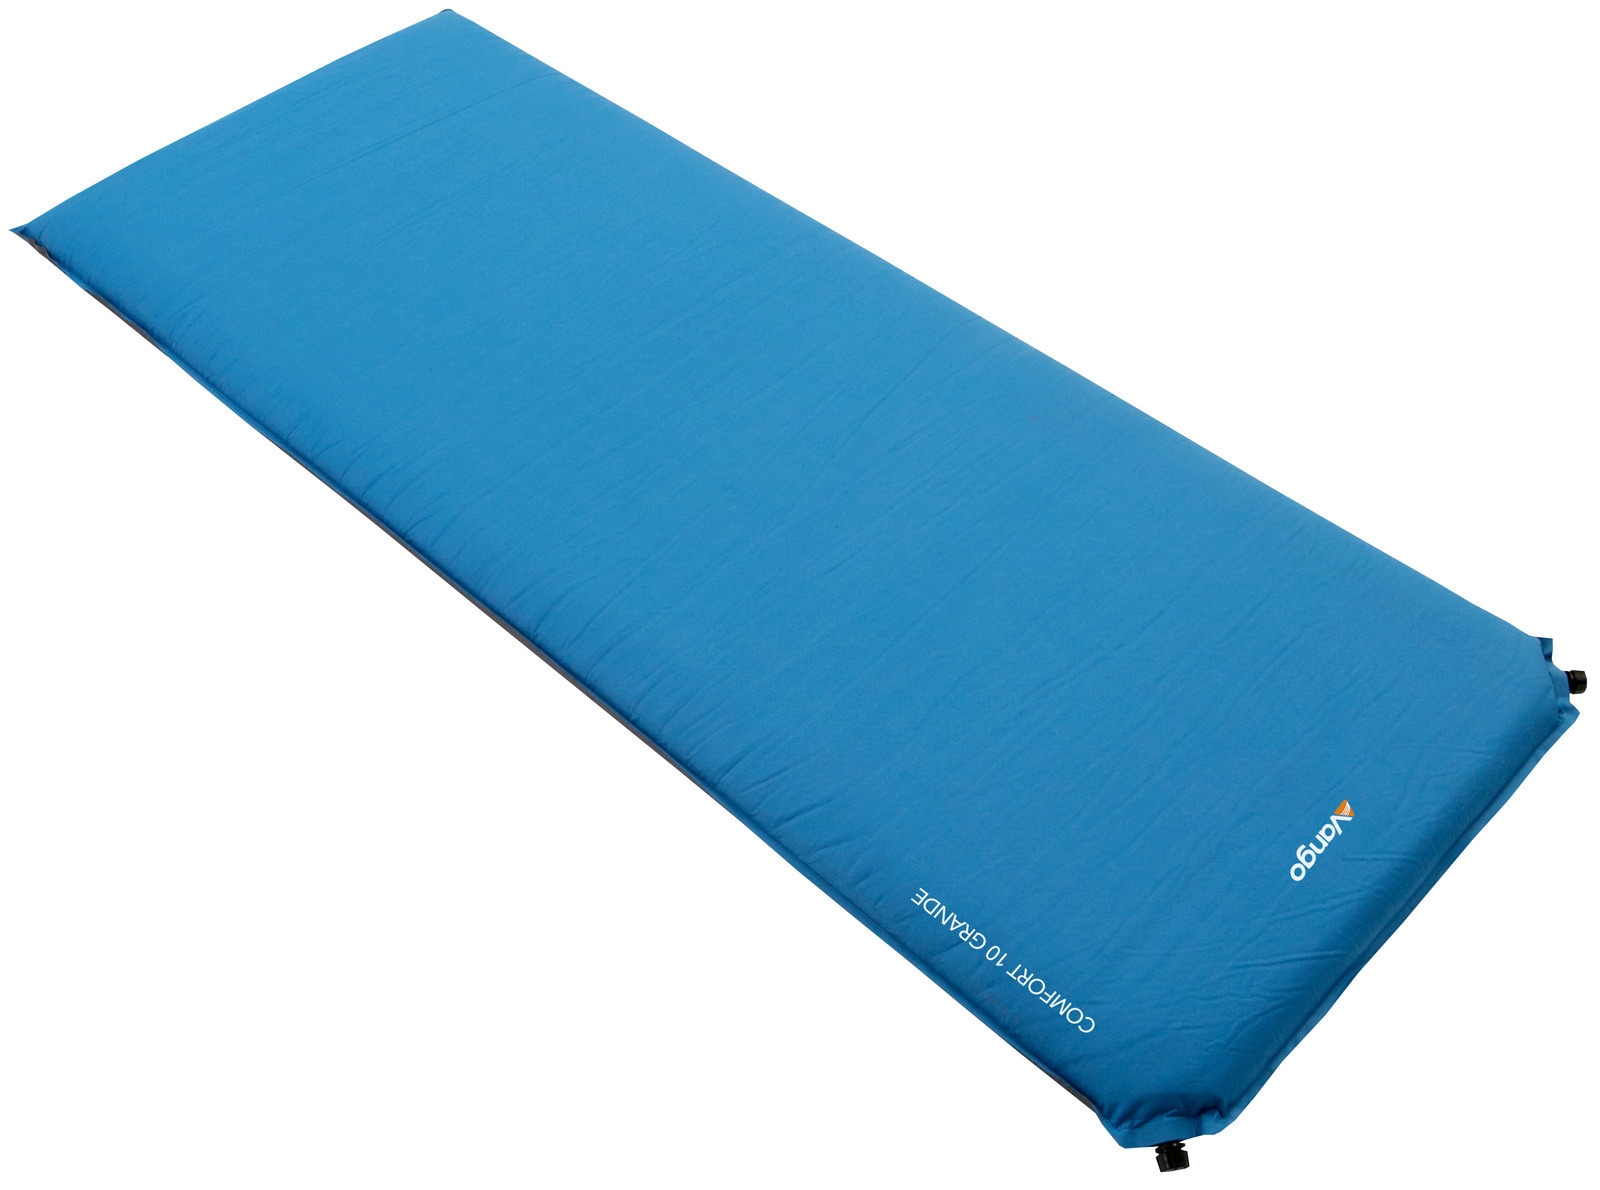 Vango Self Inflating Mat Review F10 Aero Series The Family Freestylers